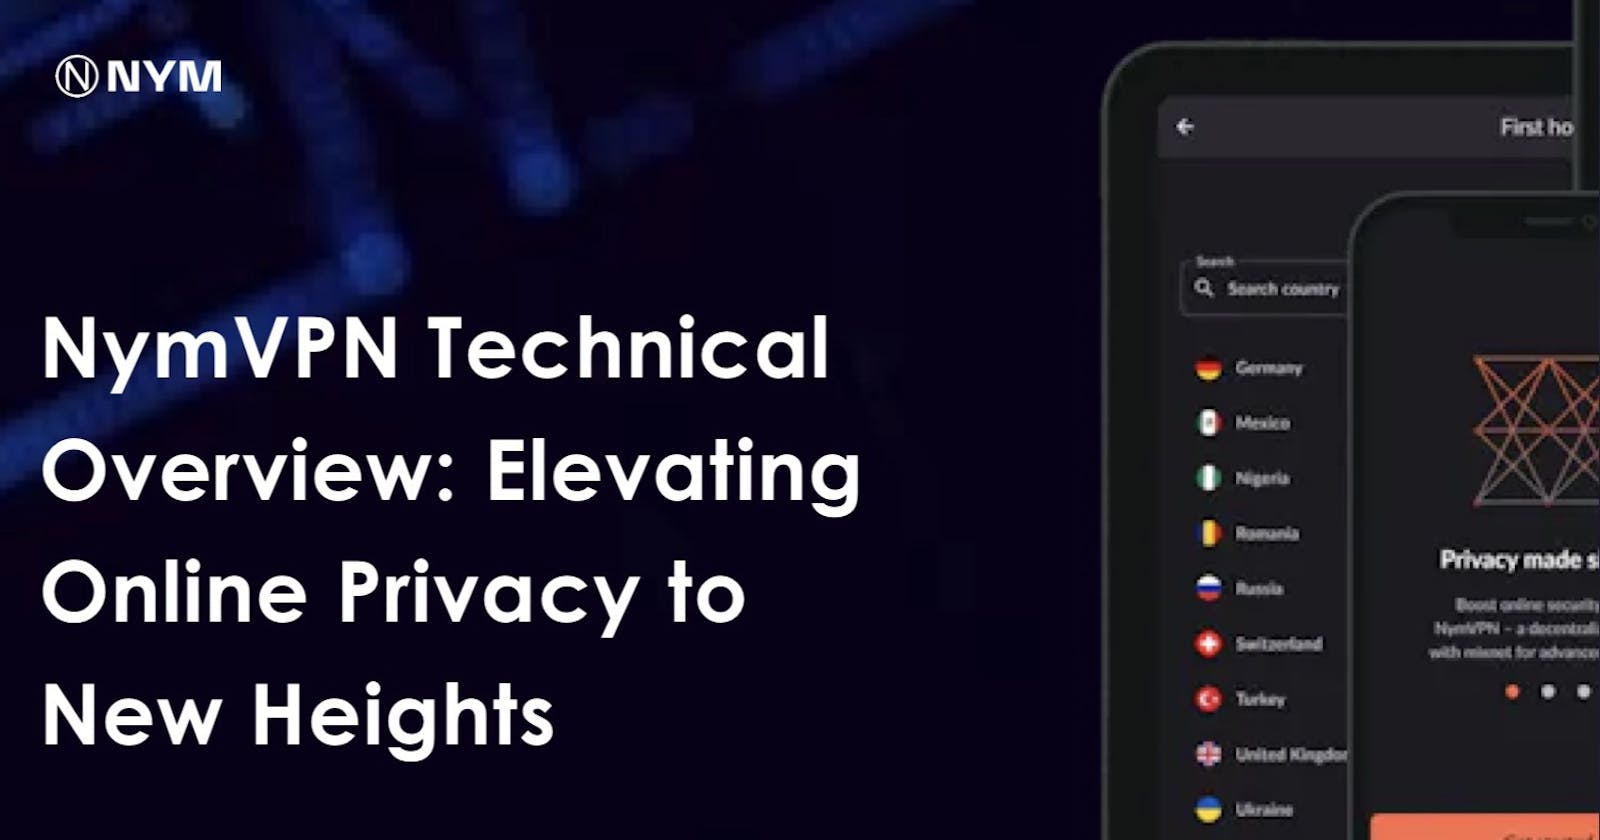 NymVPN Technical Overview: Elevating Online Privacy to New Heights